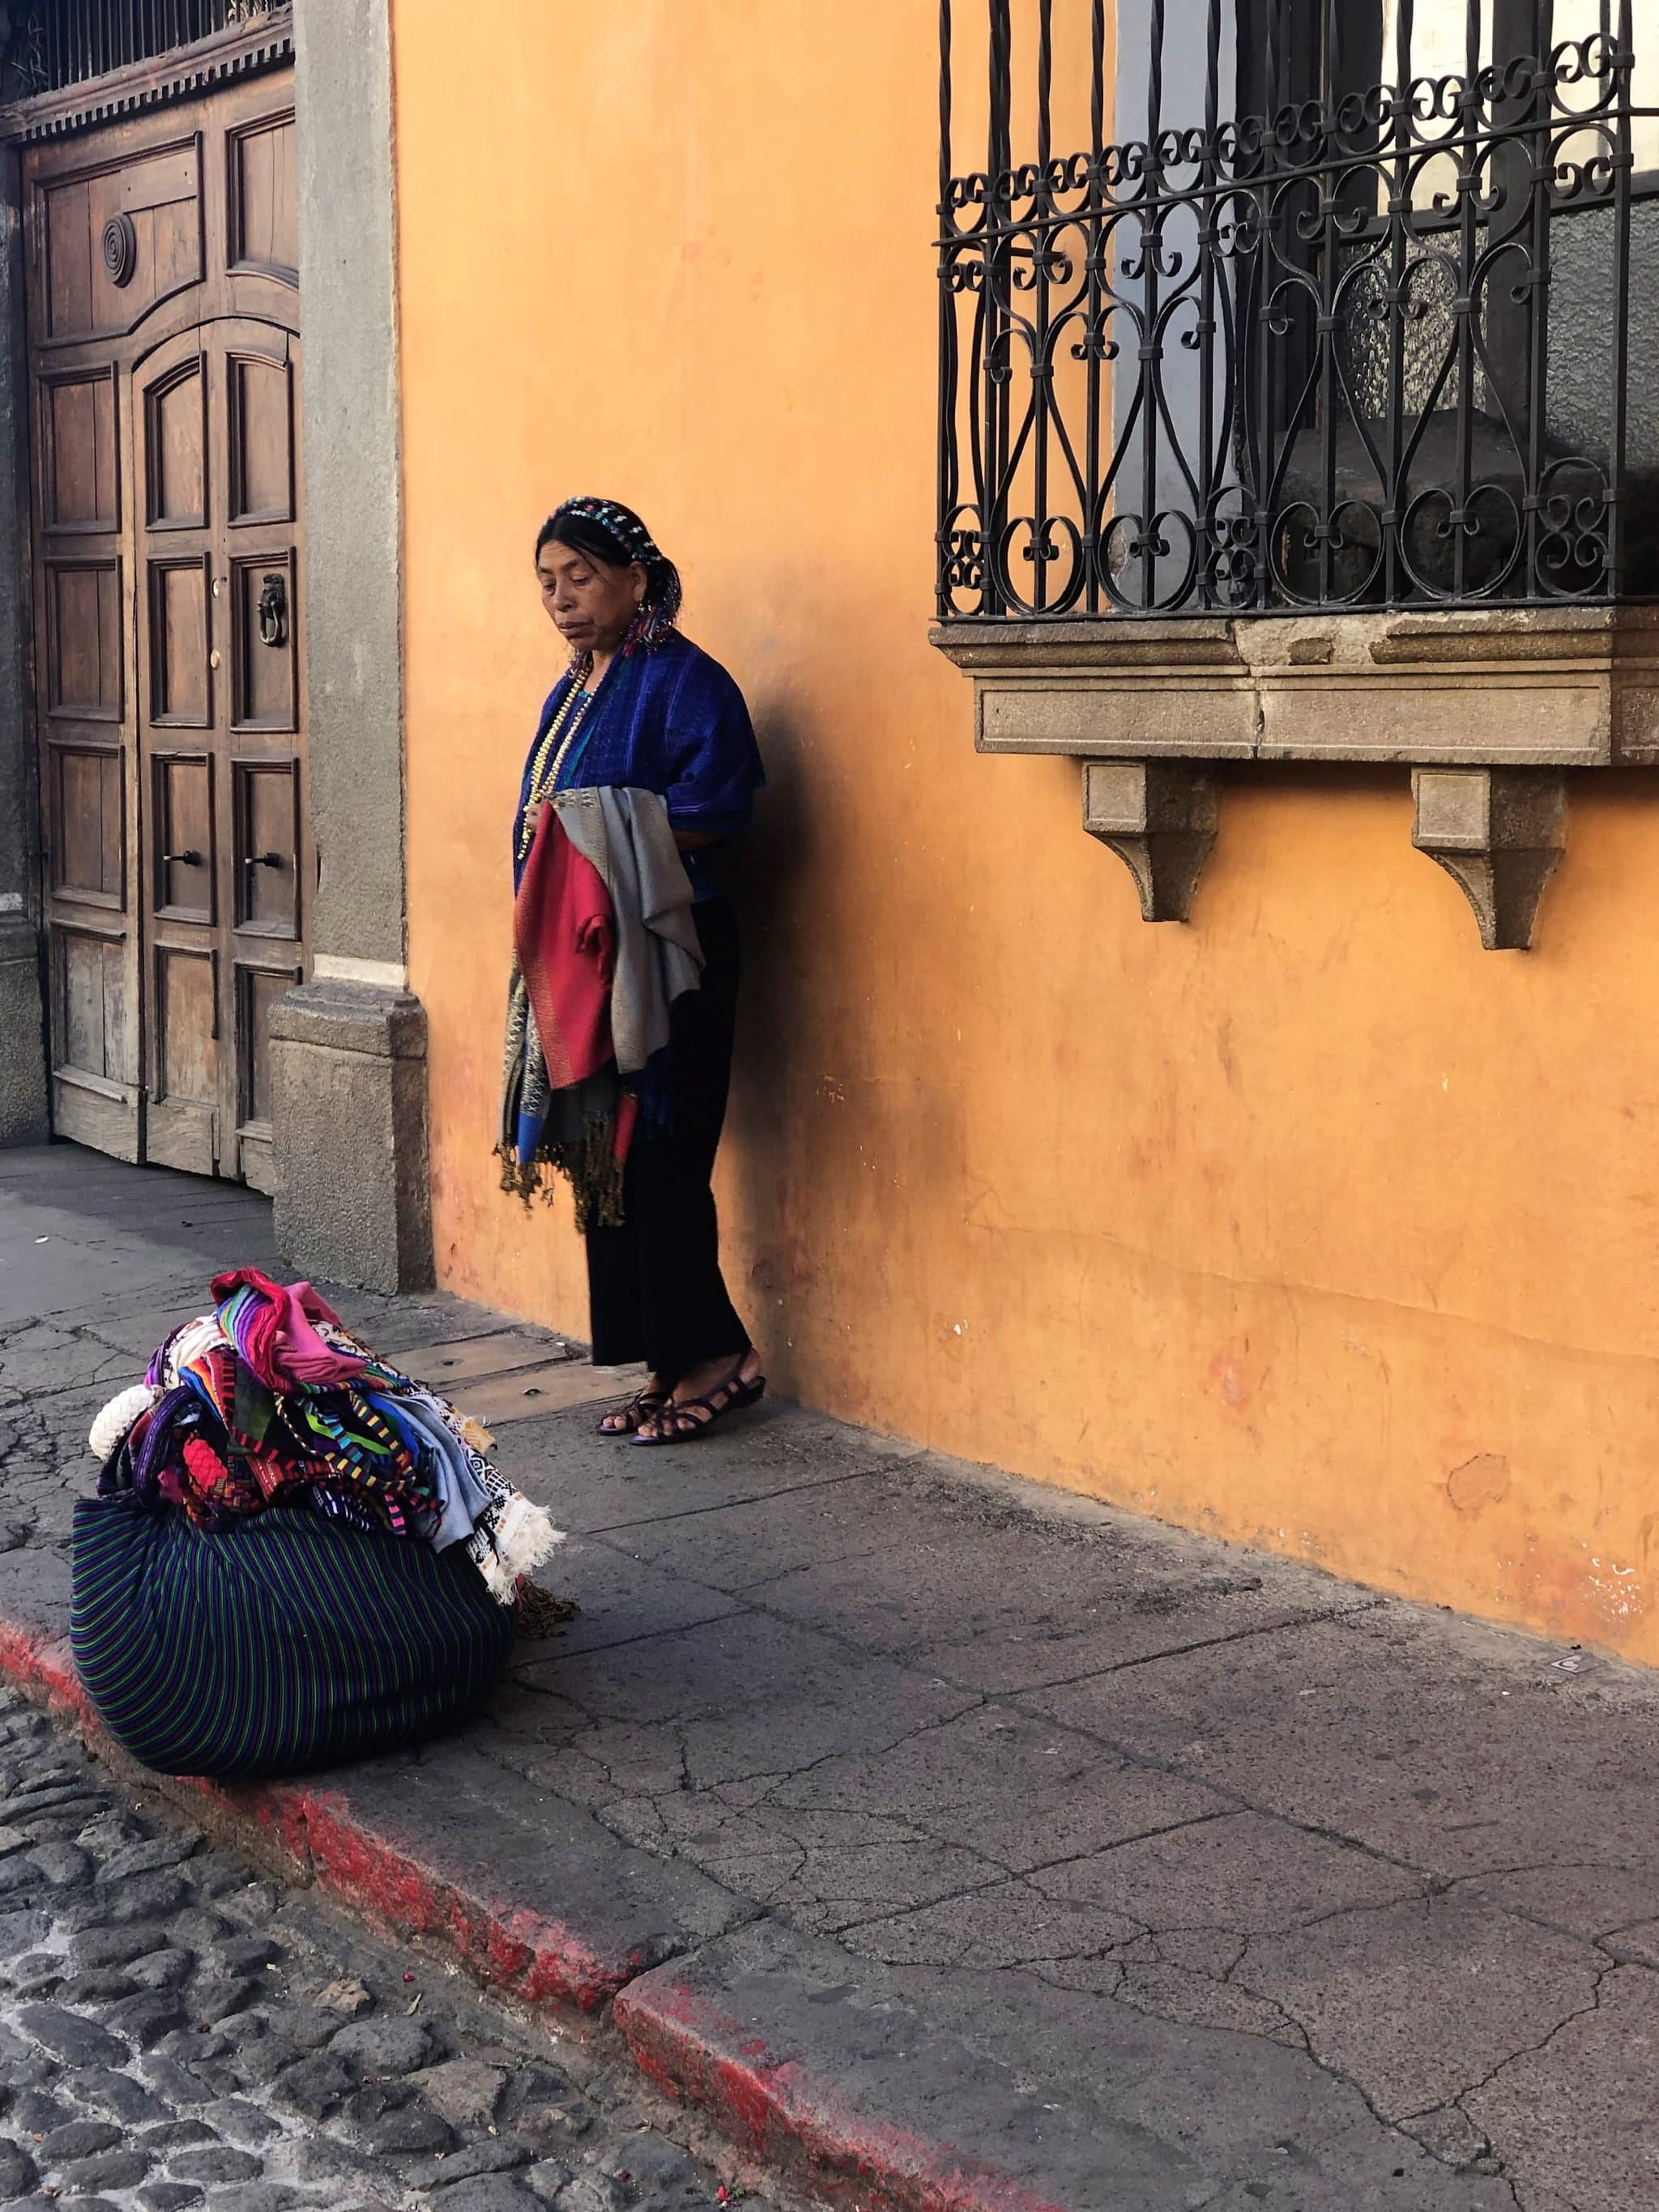 A photo gallery of street life in Antigua, Guatemala